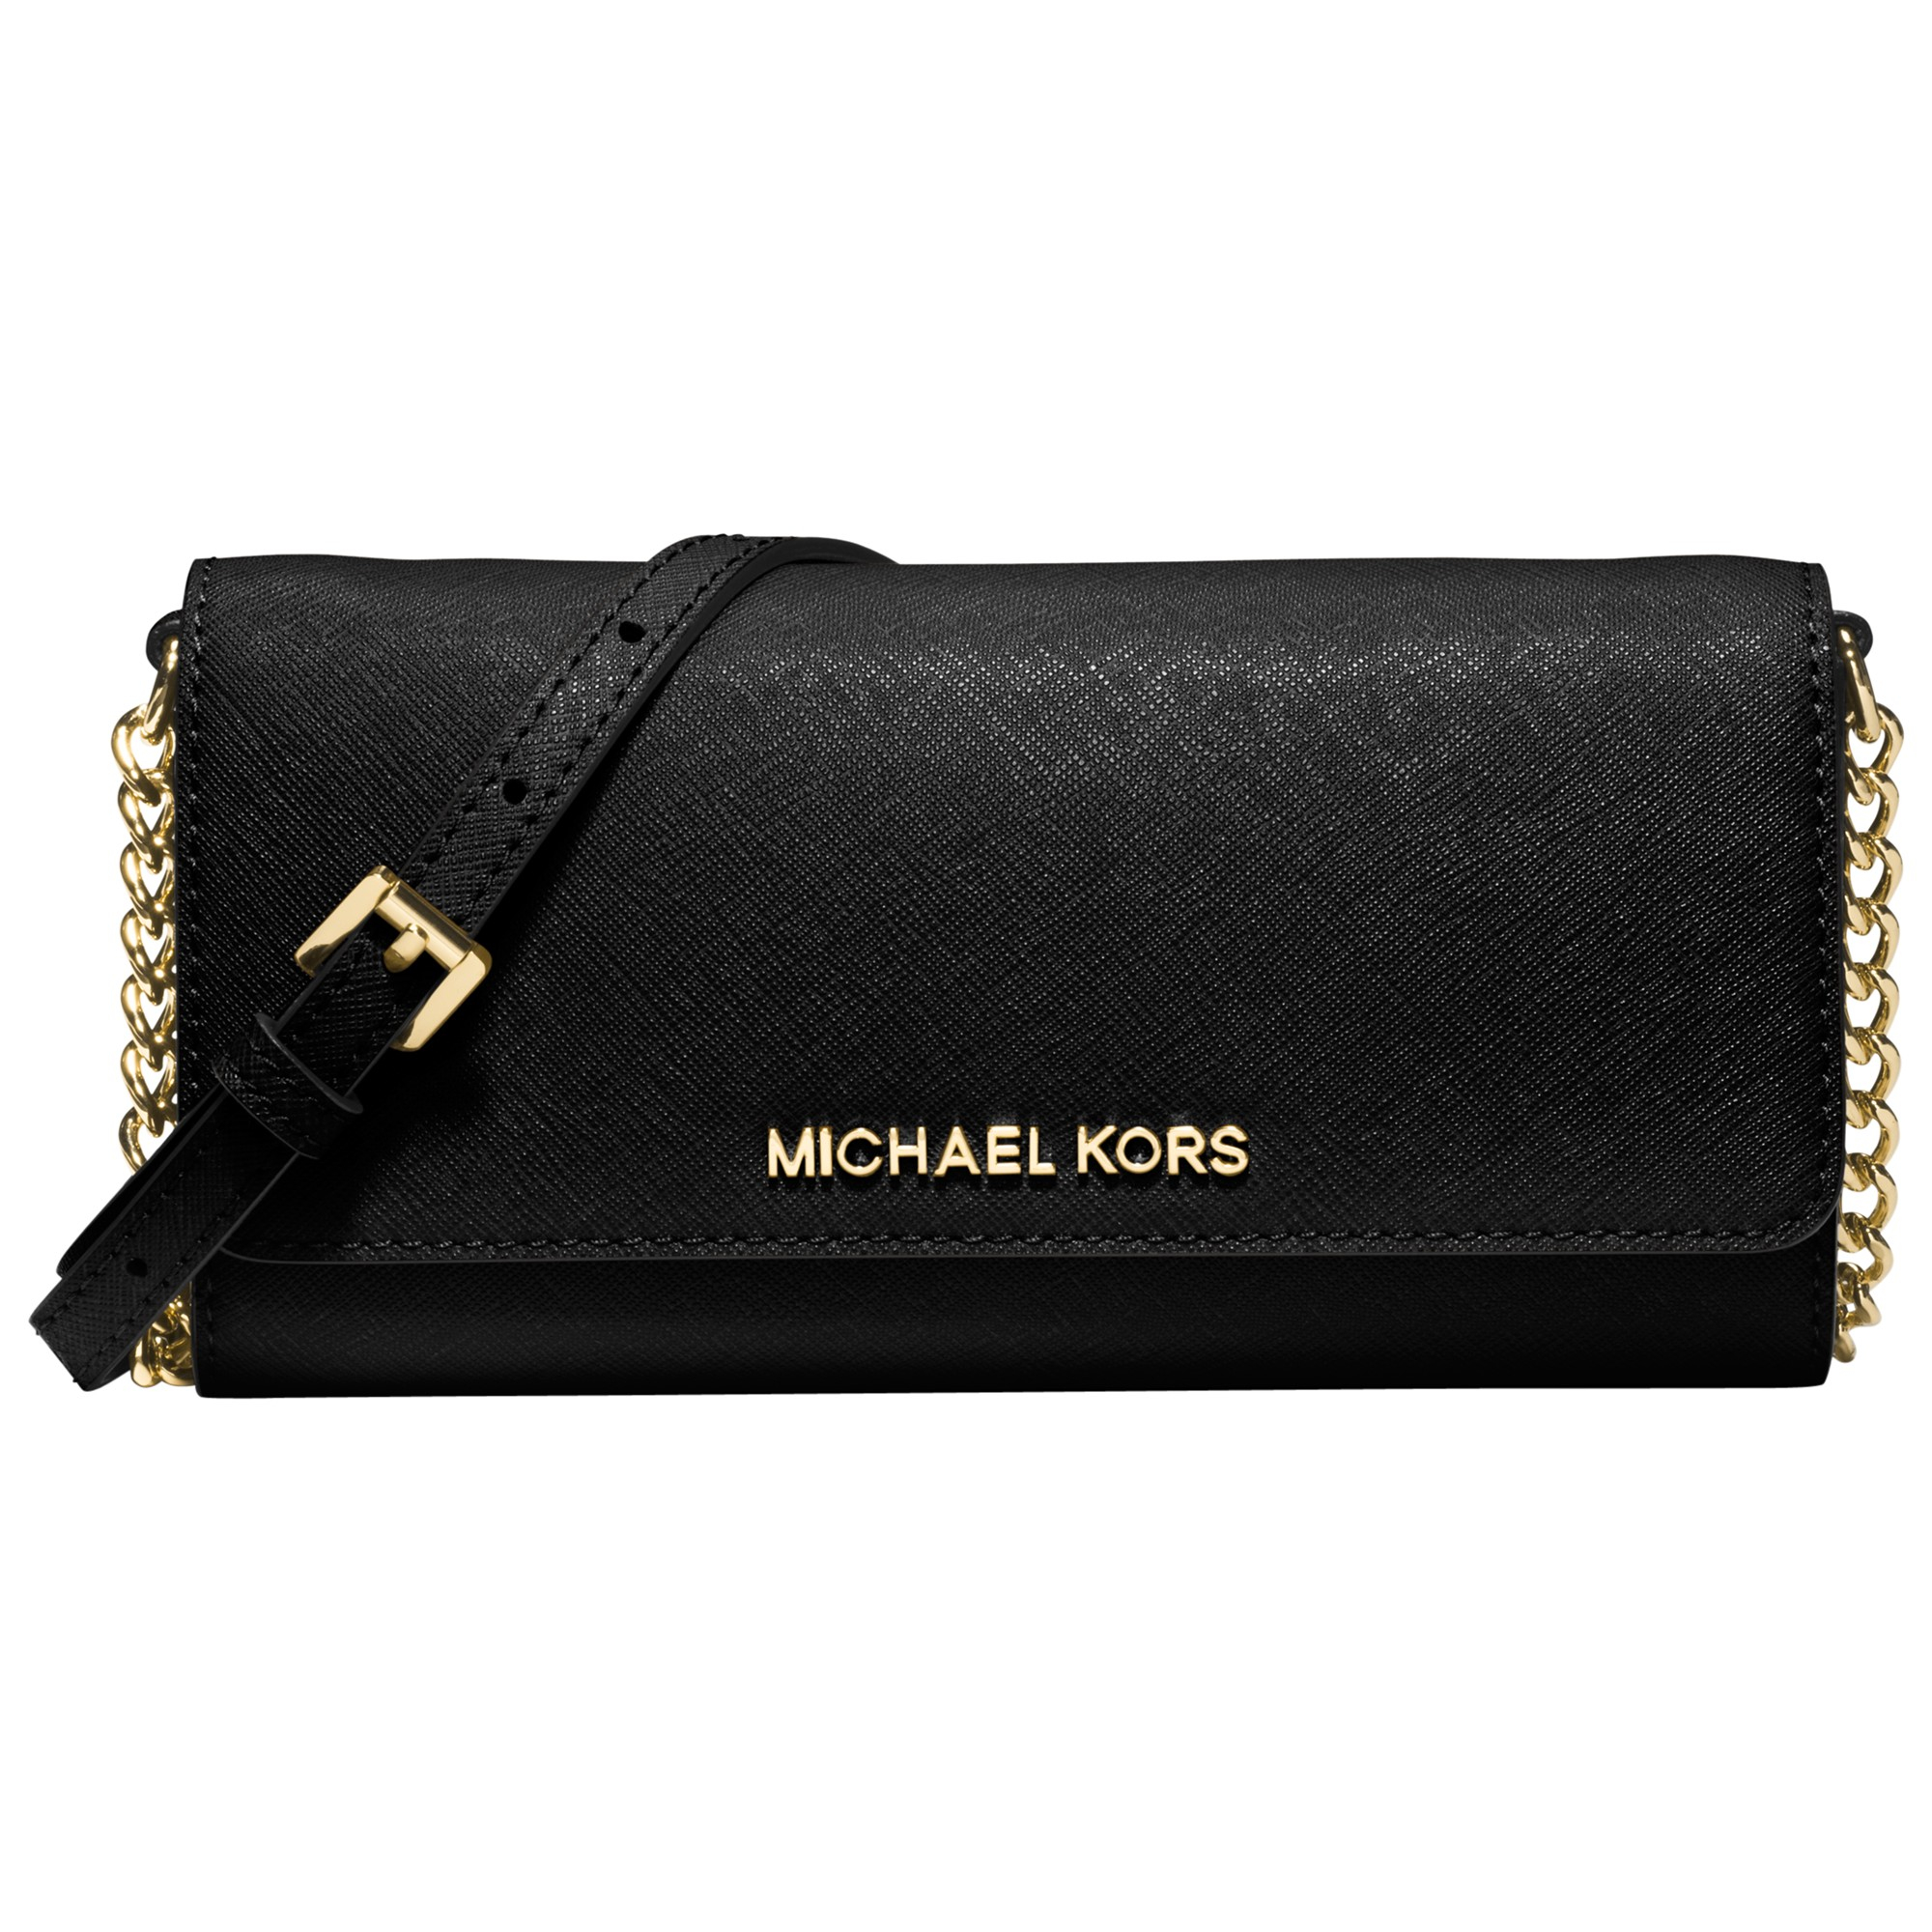 MICHAEL Michael Kors Jet Set Travel Saffiano Leather Chain Wallet in ...